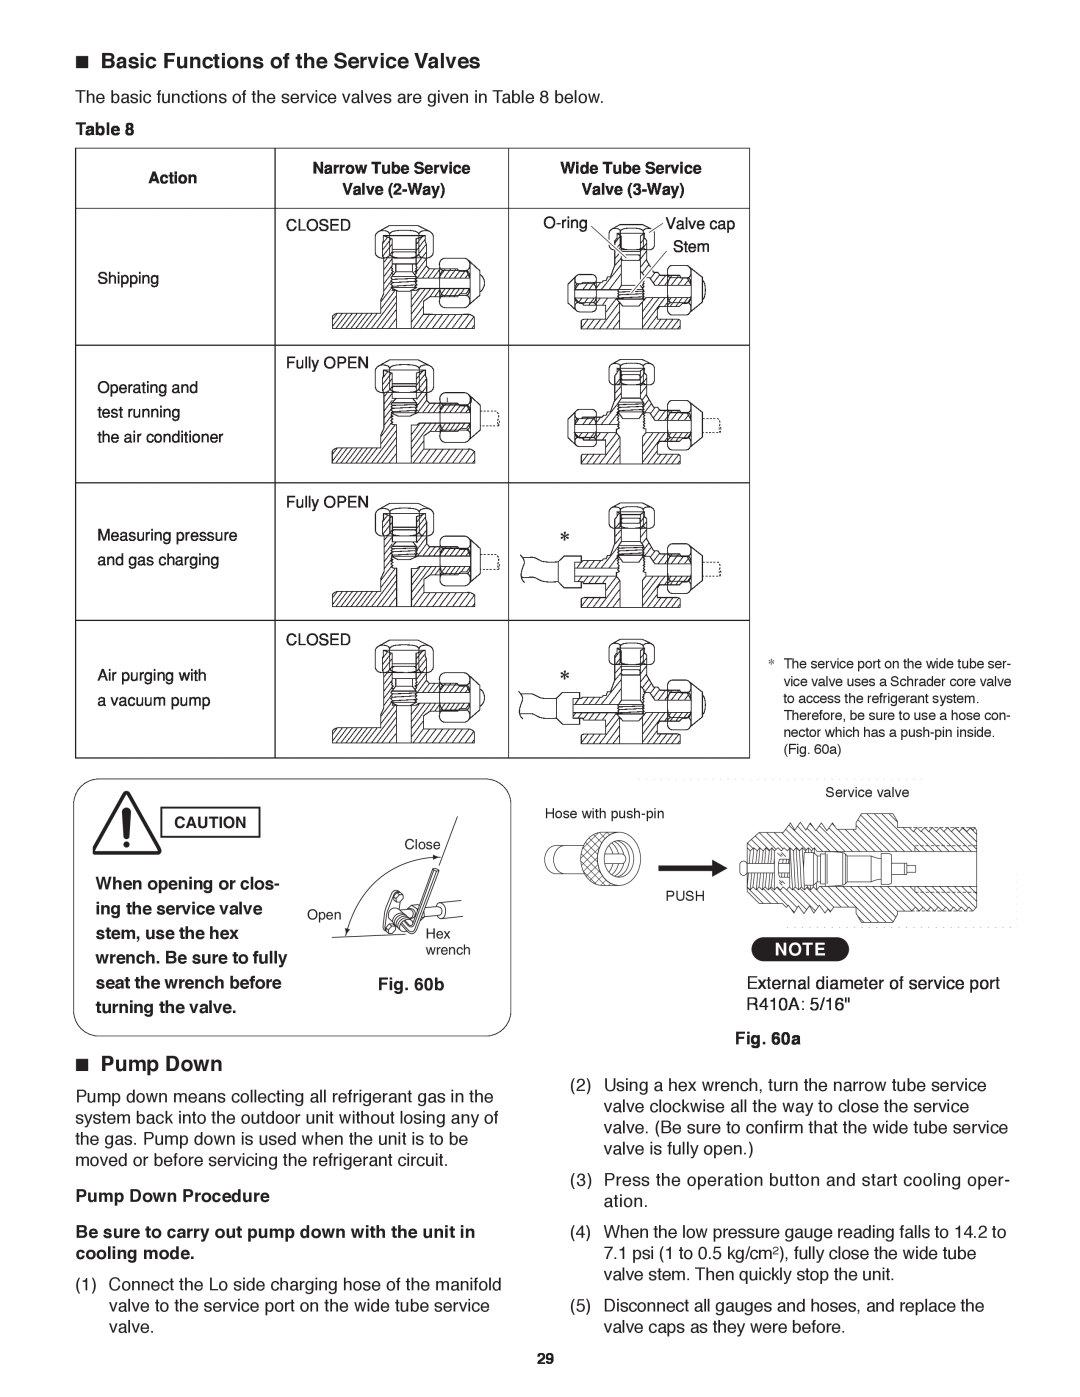 Panasonic CU-KE30NKU, CU-KE36NKU, CS-KE36NKU, CS-KE30NKU service manual Basic Functions of the Service Valves, Pump Down 